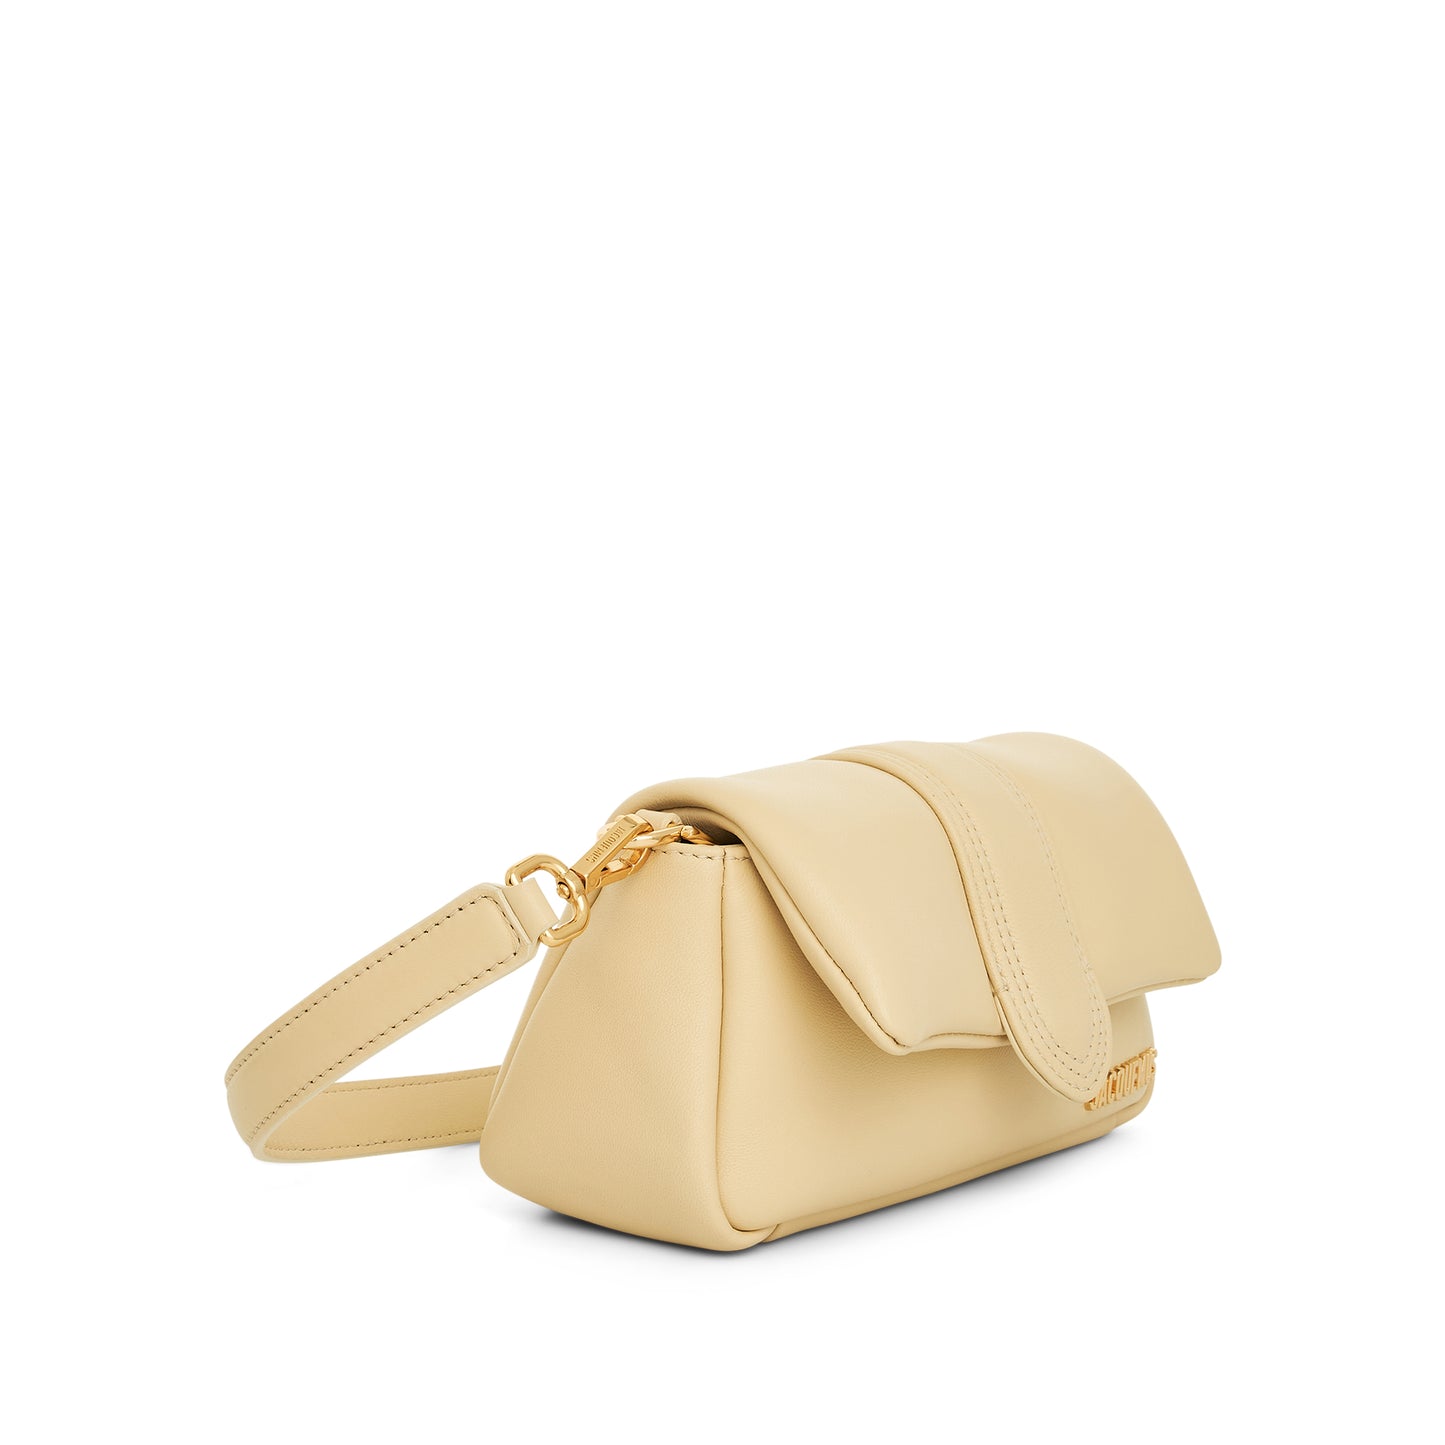 Le Petit Bambimou Leather Bag in Ivory